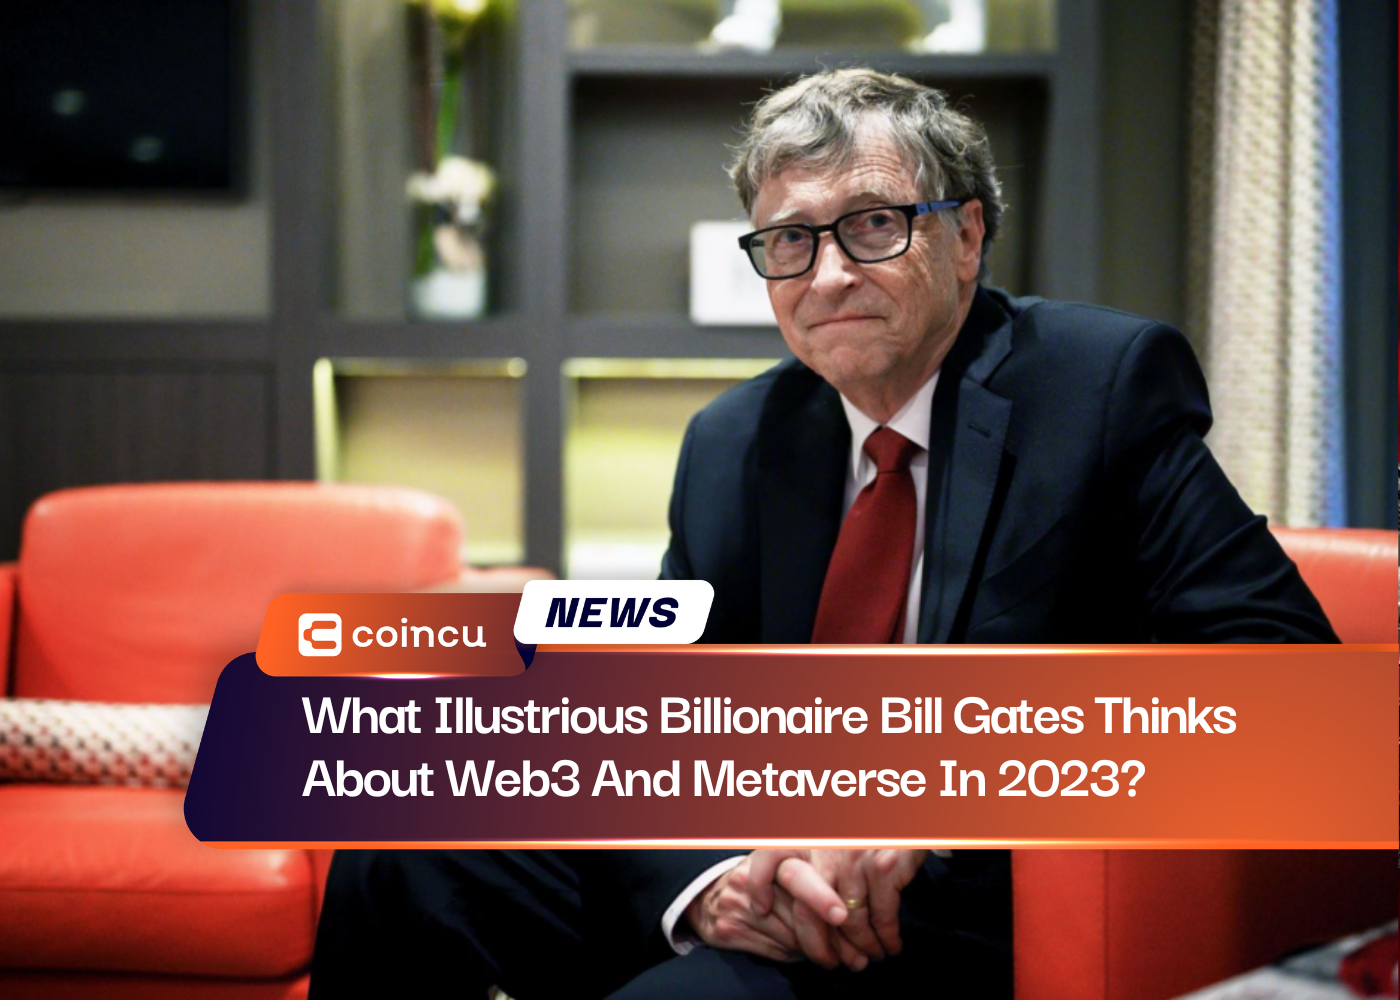 What Illustrious Billionaire Bill Gates Thinks About Web3 And Metaverse In 2023?